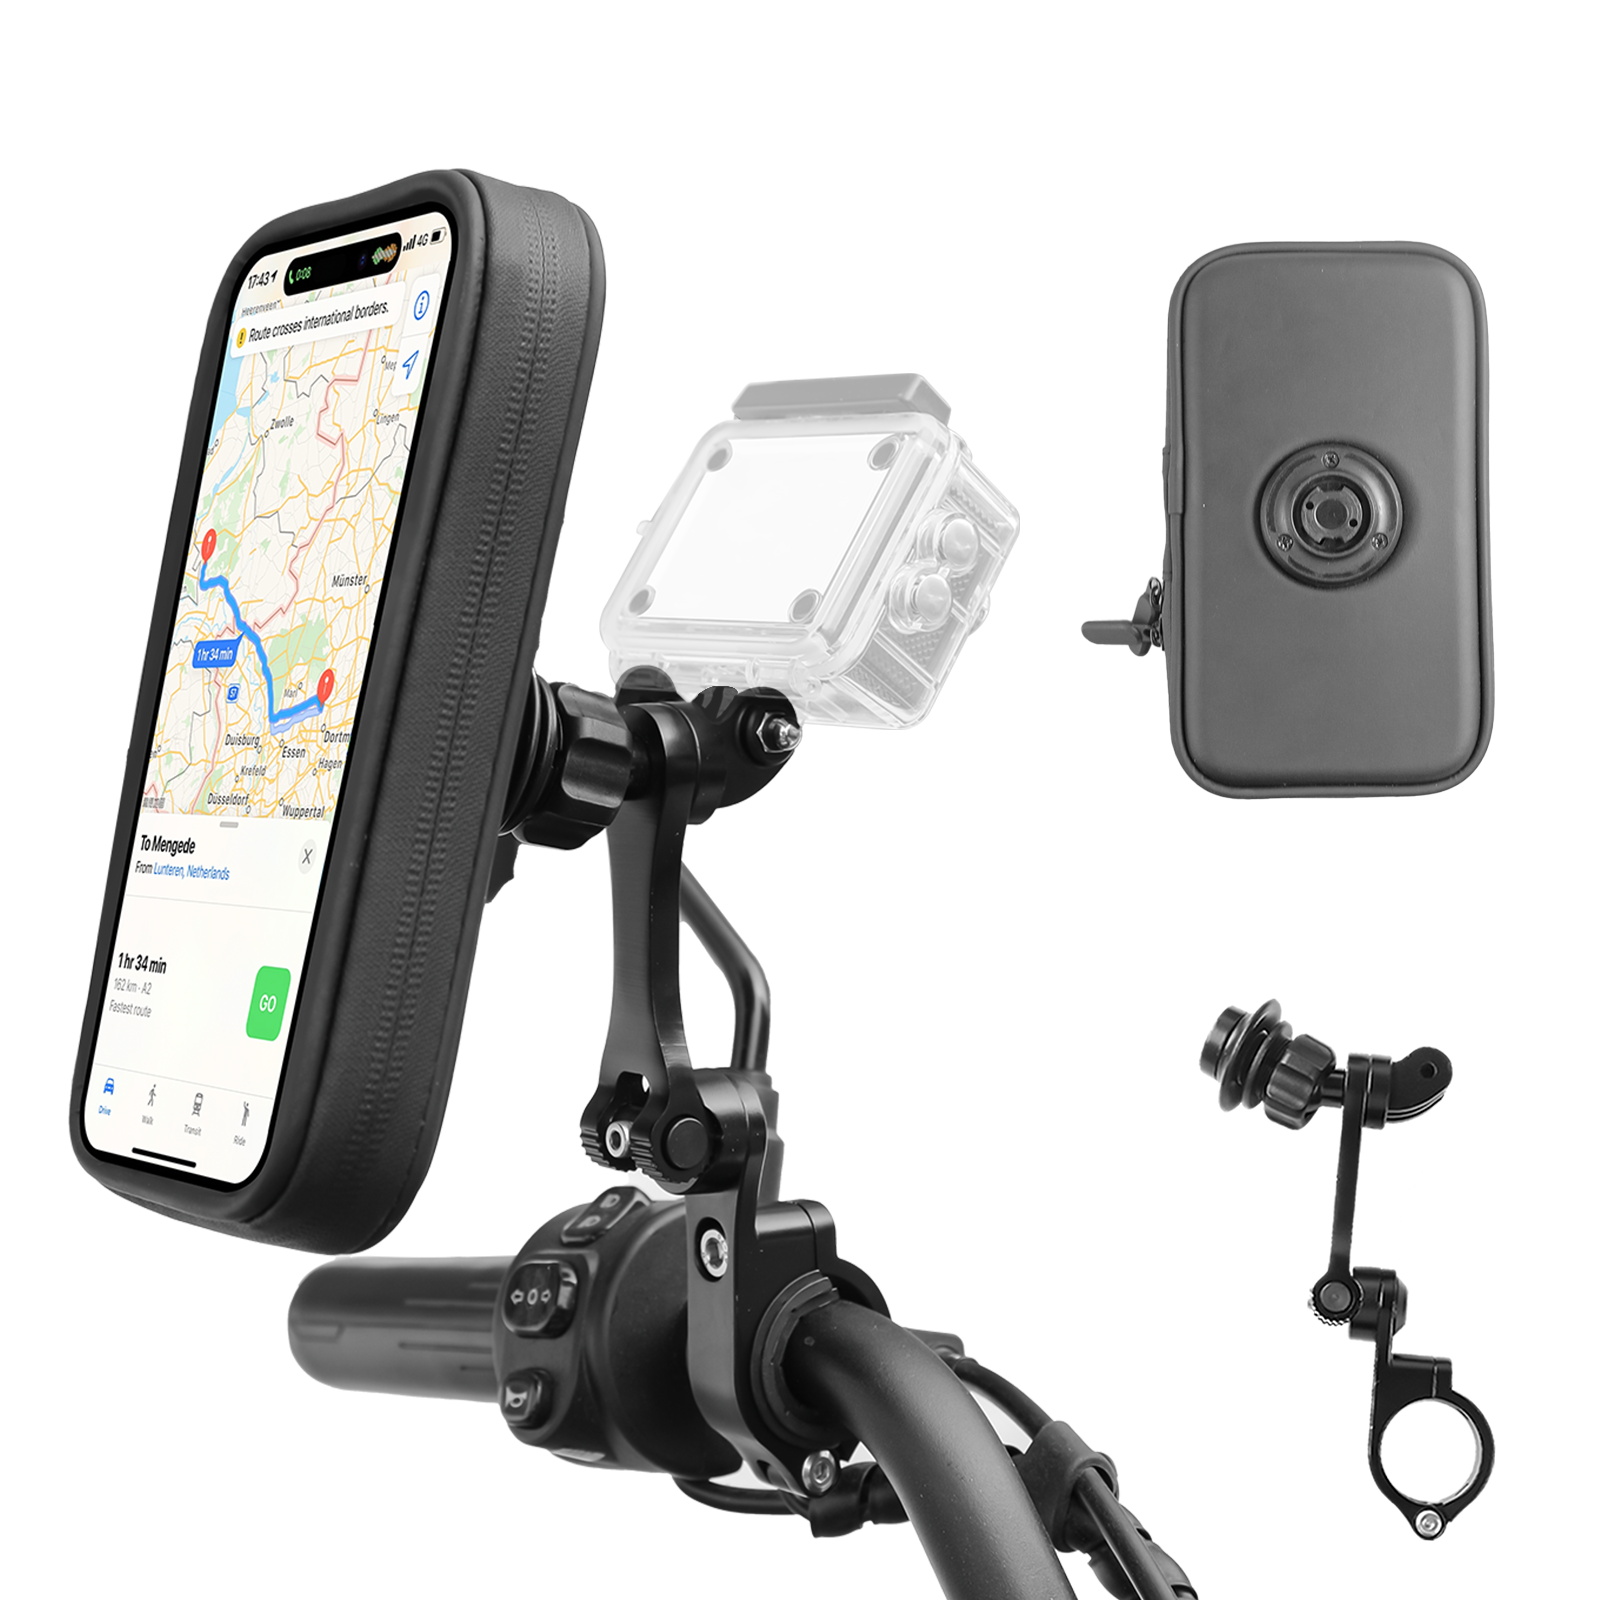 SUNDAREE Motorcycle Phone Waterproof Bag with Aluminum Handlebar MountingClip, 360° Rotating Phone Holder Mountable GOPRO, Motorcycle phone Bag for iphoneand More 4.7" to 6.8"$martphones